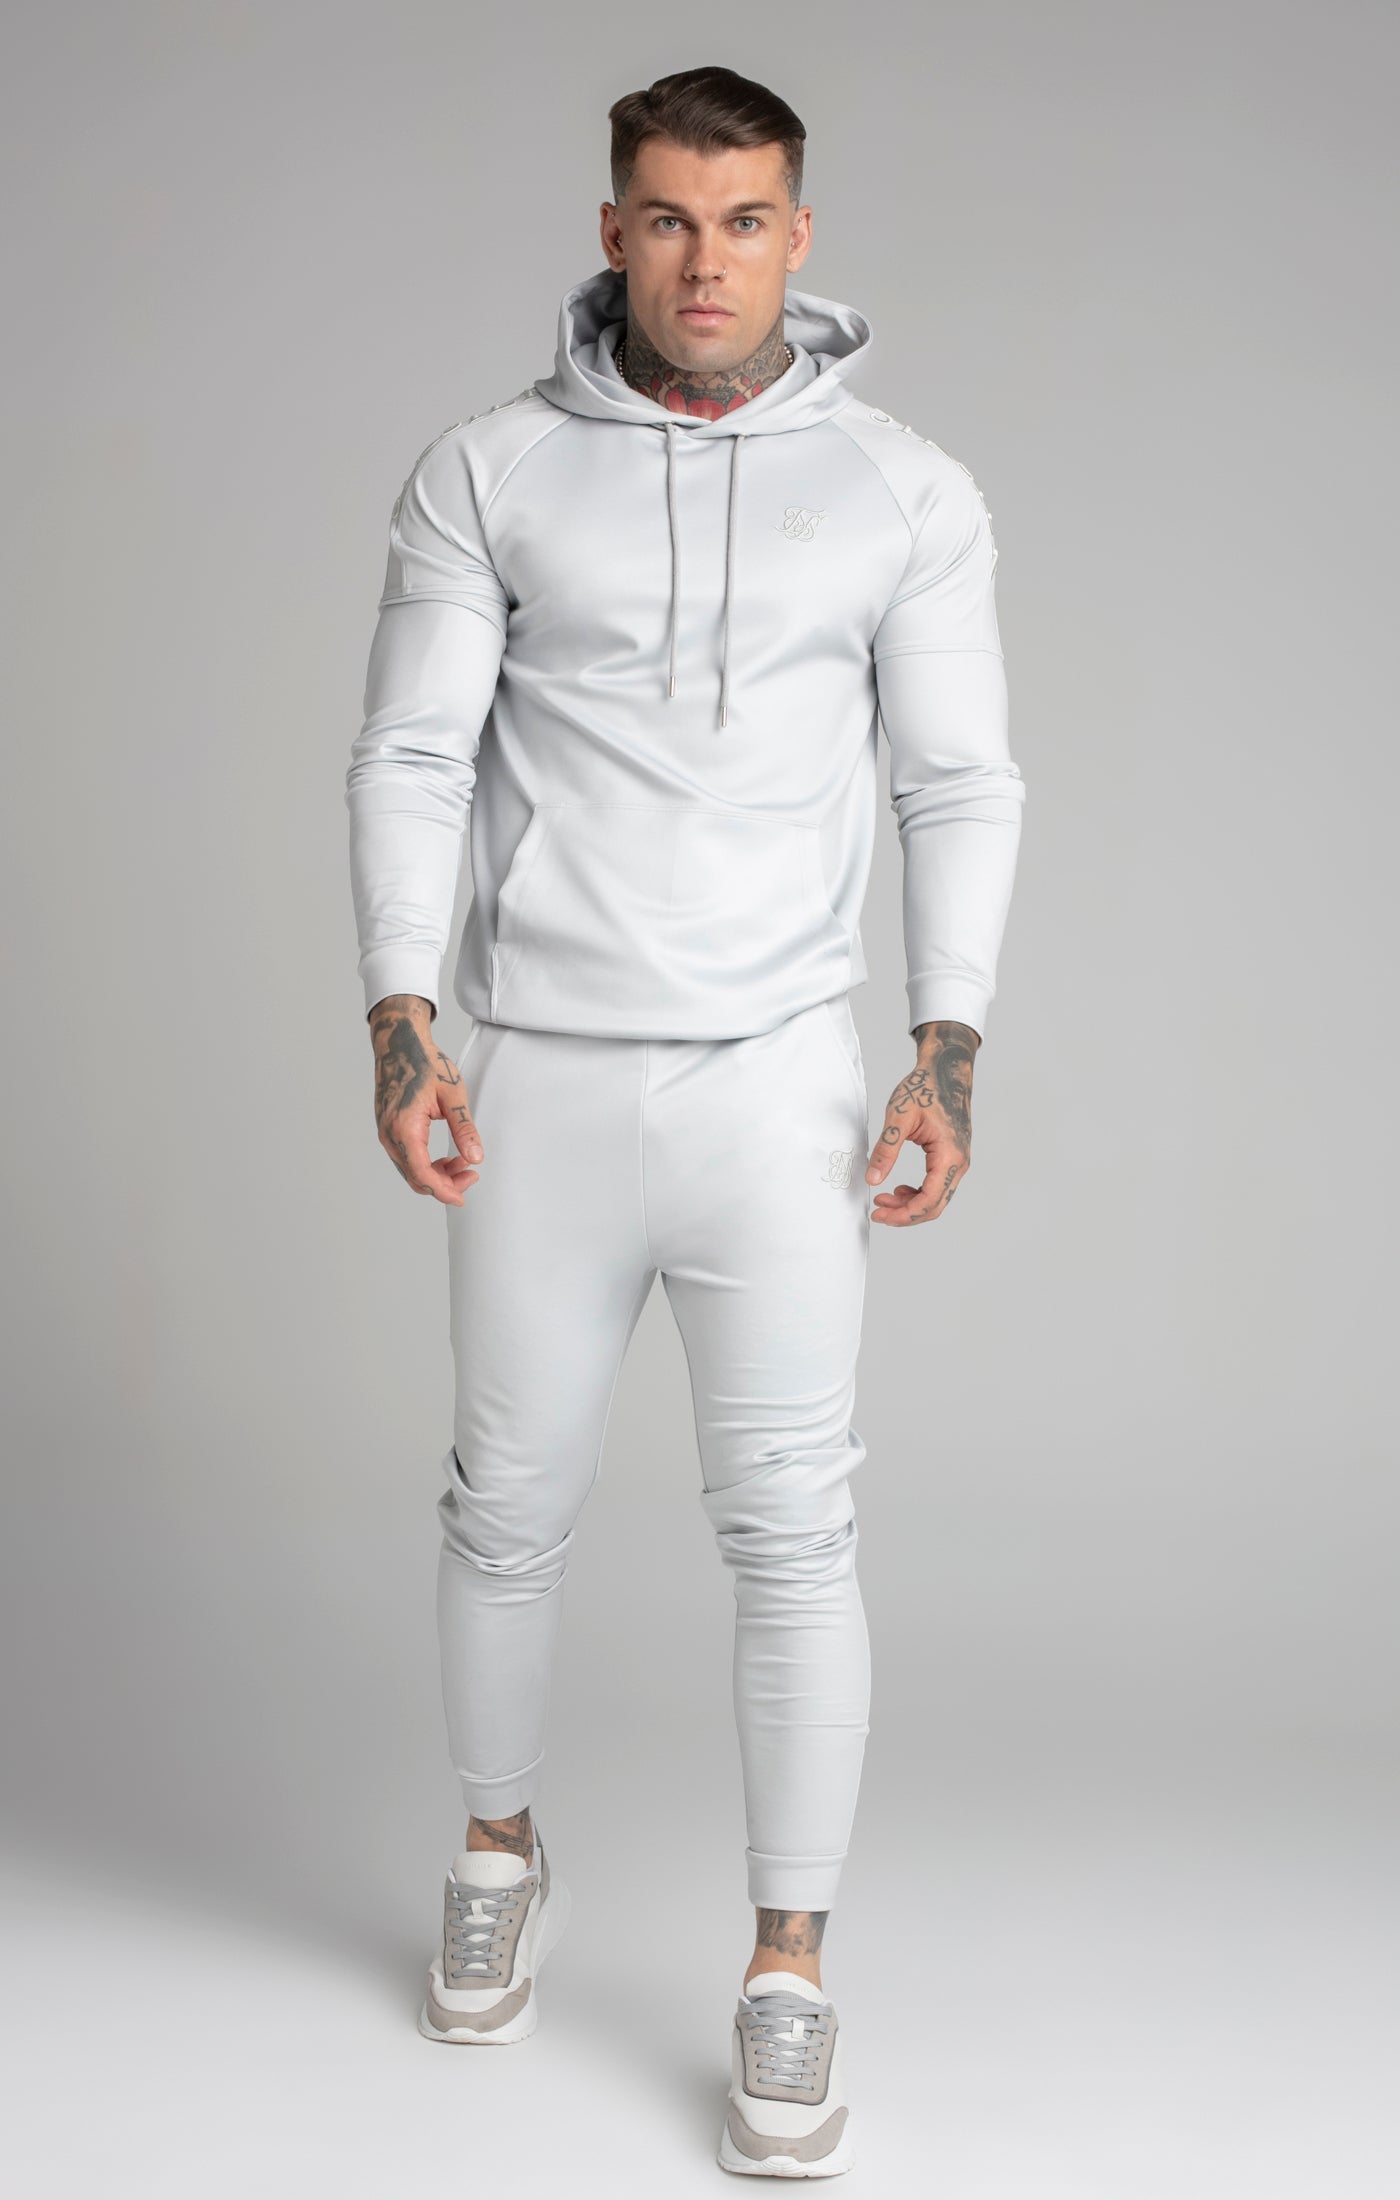 Embroidered Panel Cuffed Pant in Grey Hosen SikSilk   